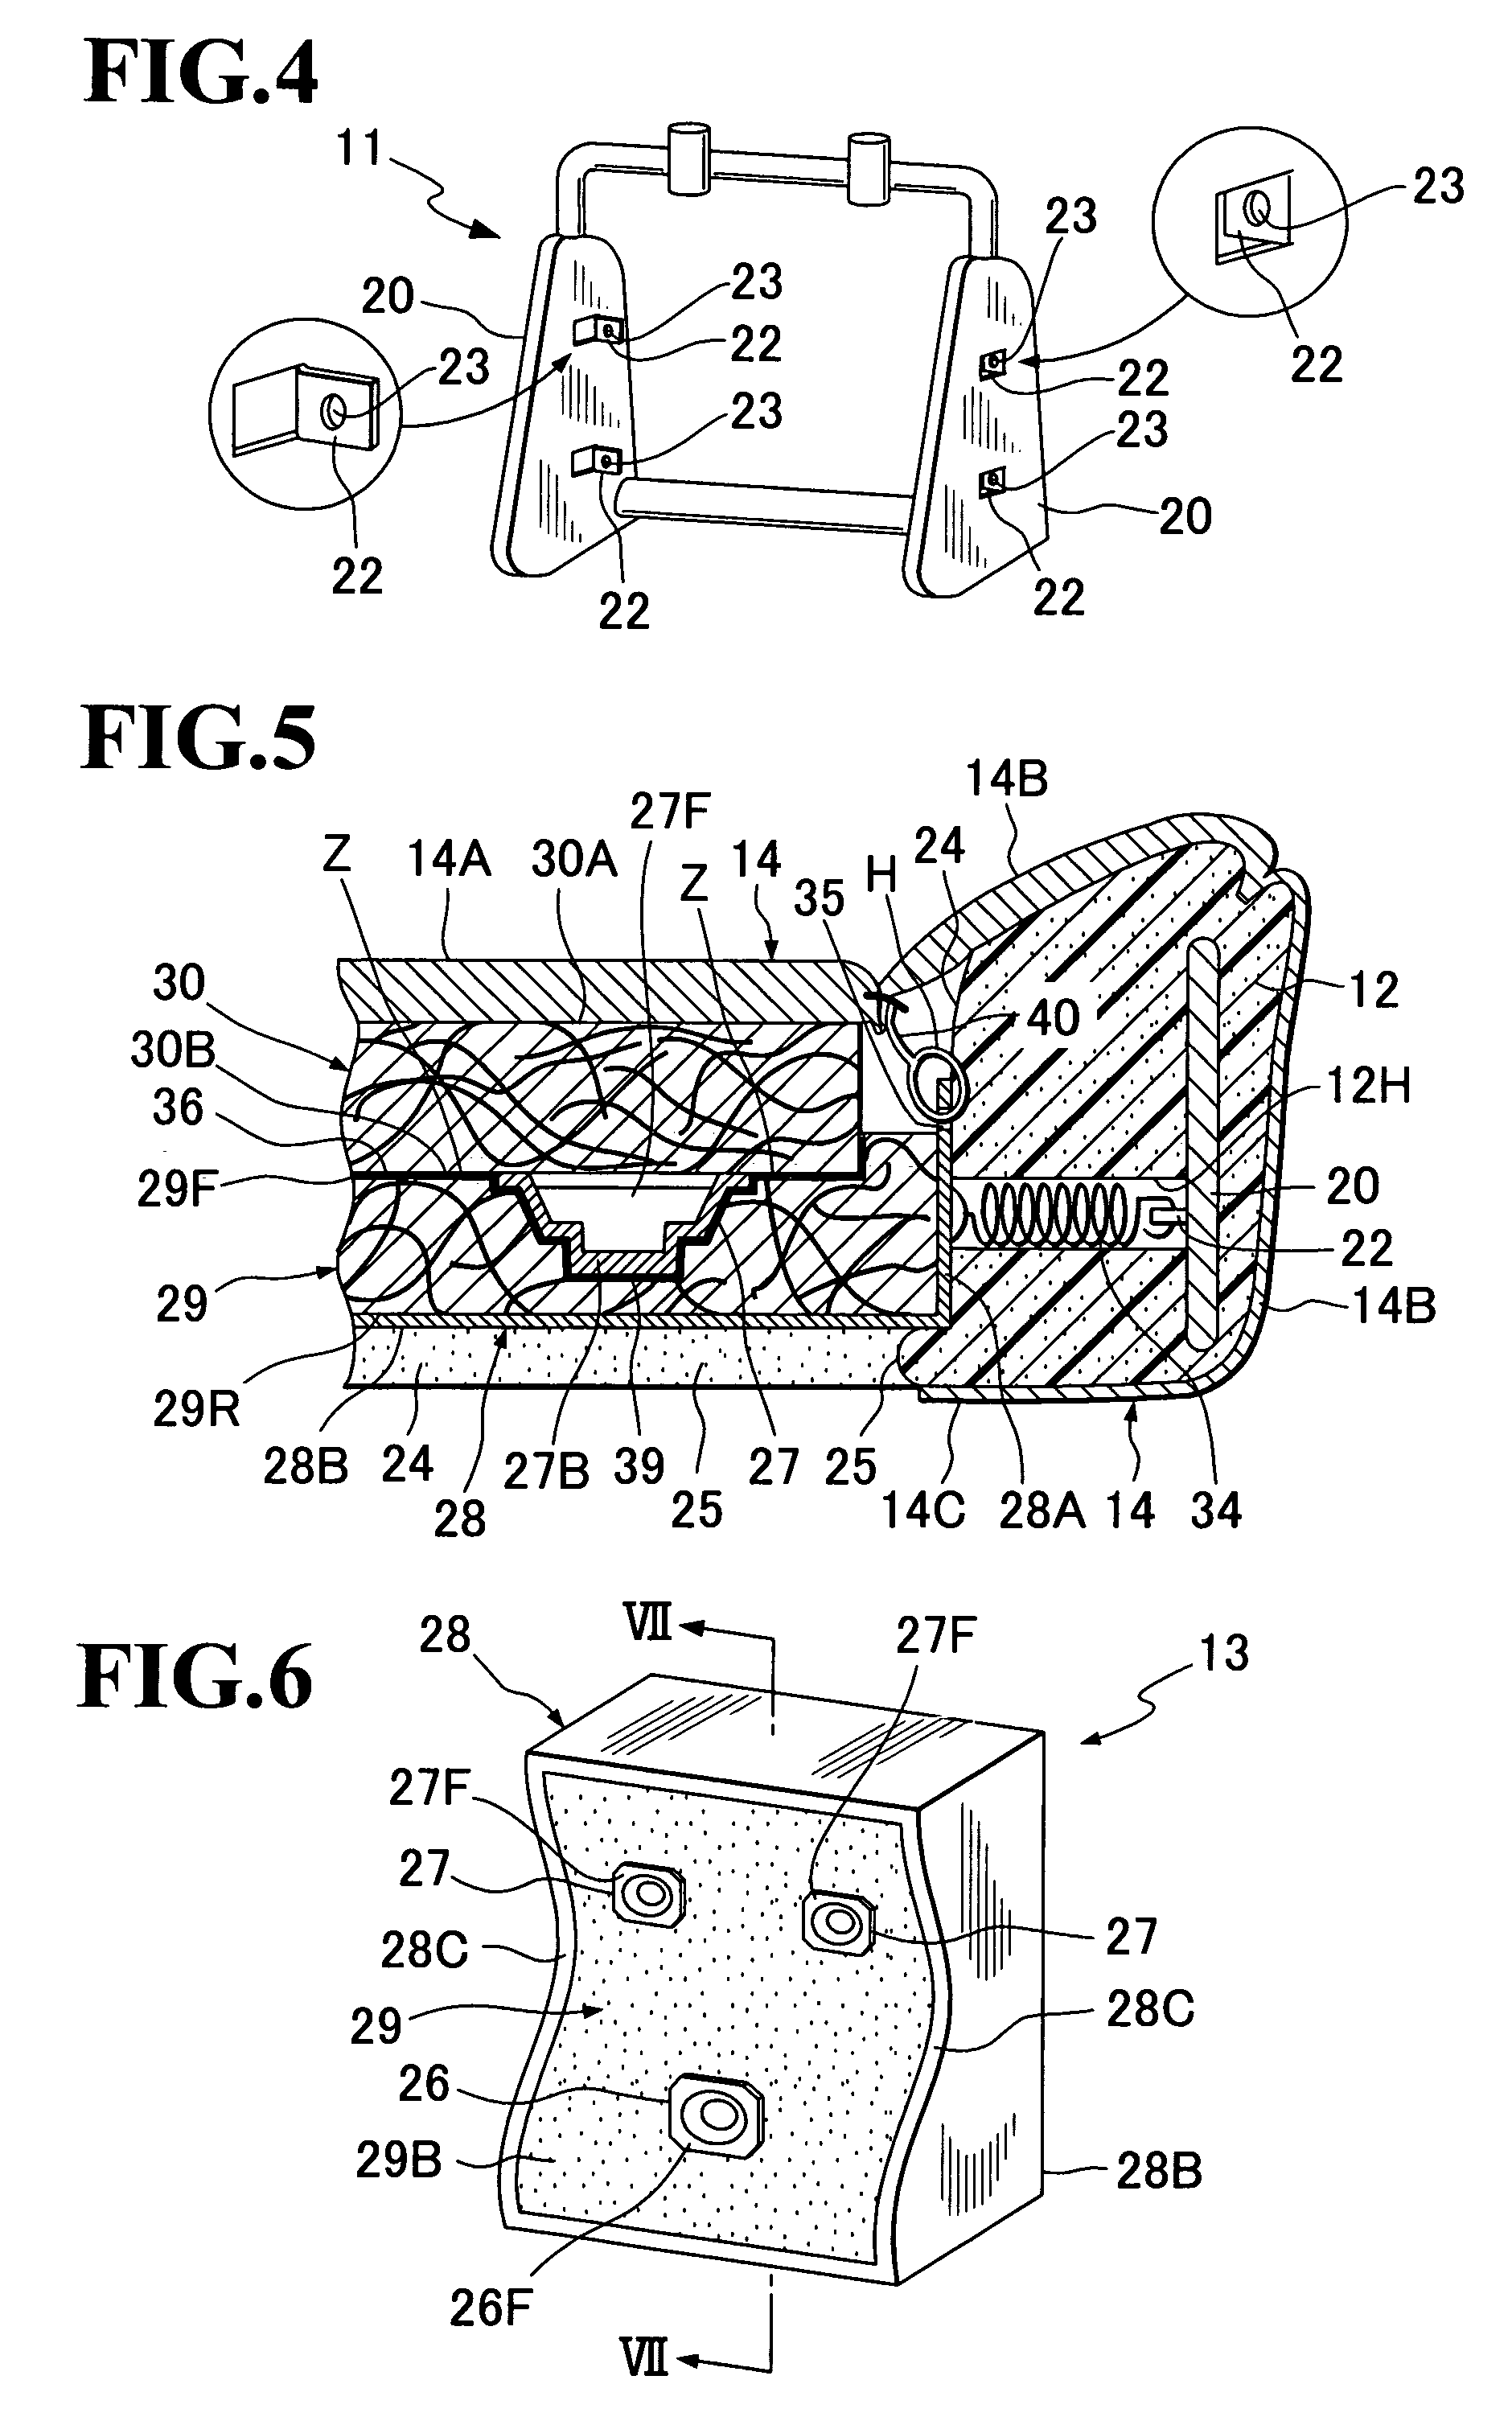 Acoustin structure of seat back